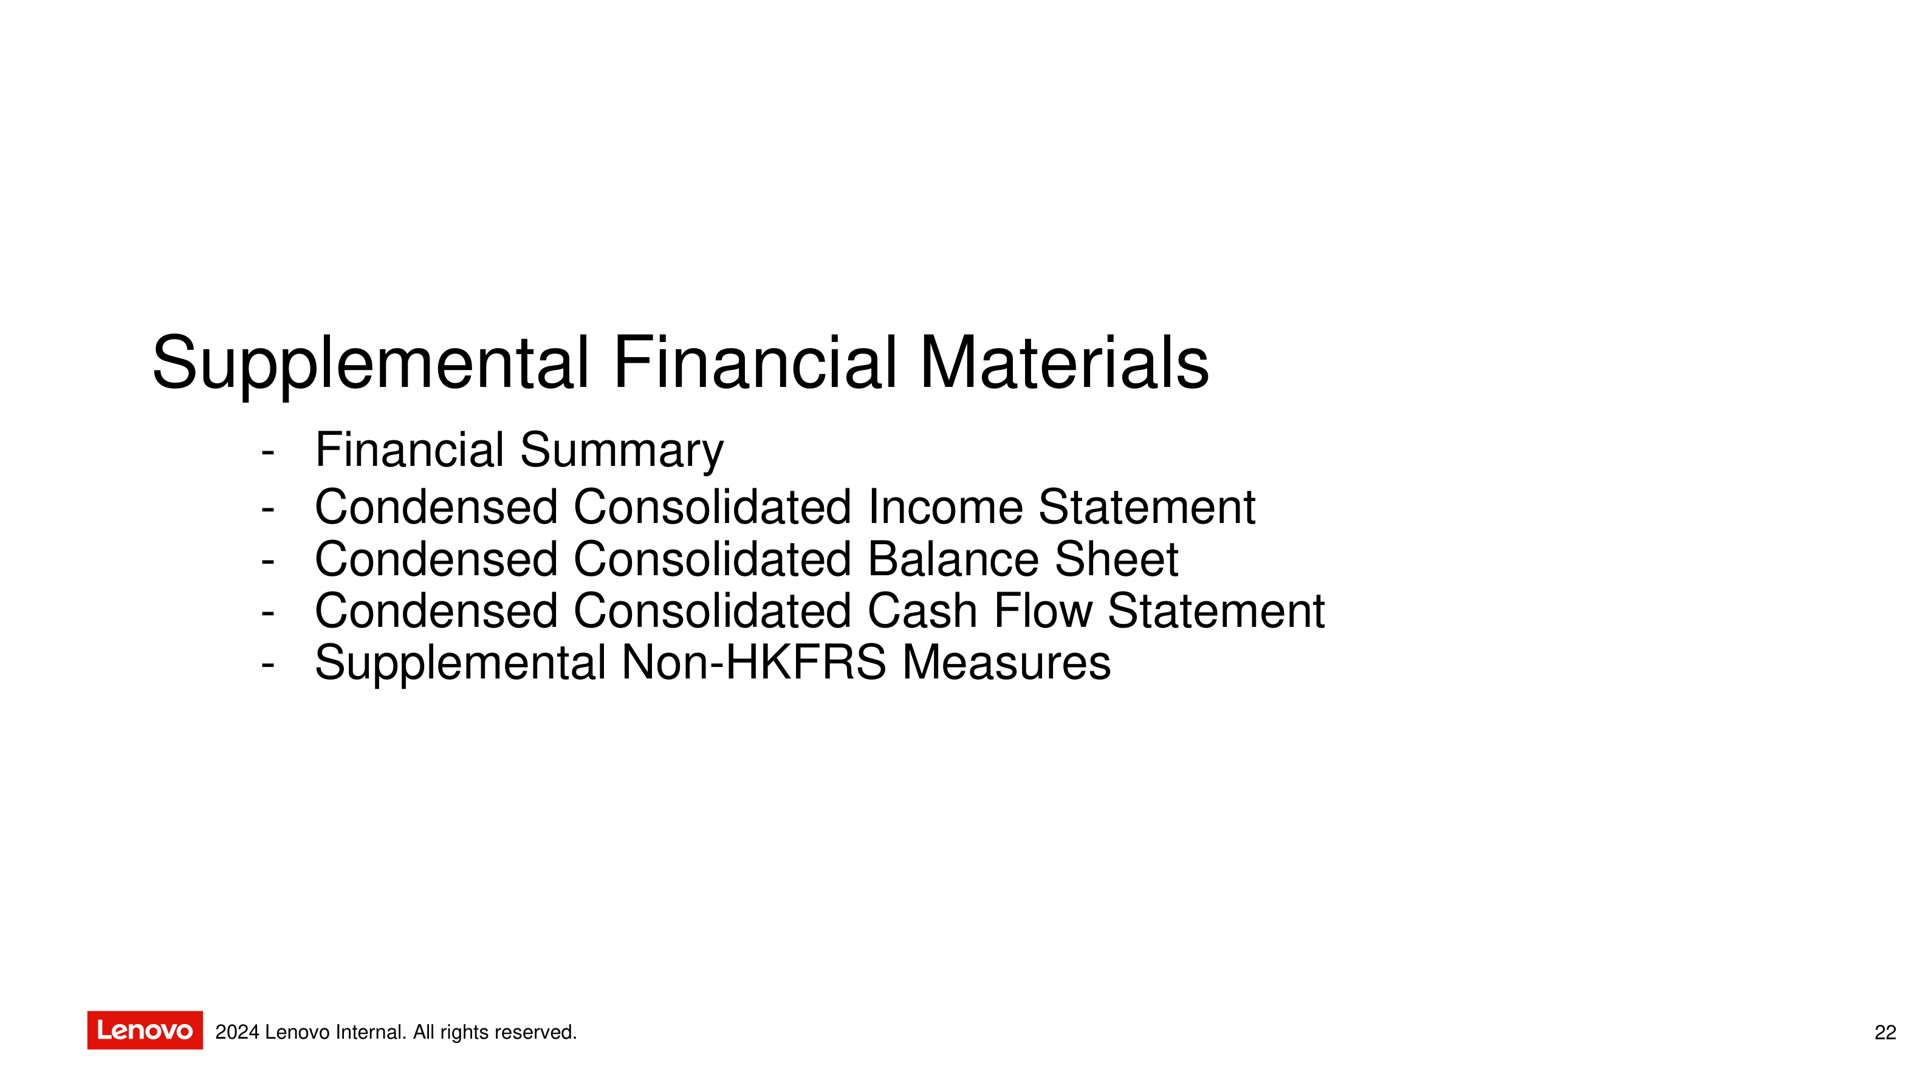 supplemental financial materials financial summary condensed consolidated income statement condensed consolidated balance sheet condensed consolidated cash flow statement supplemental non measures | Lenovo